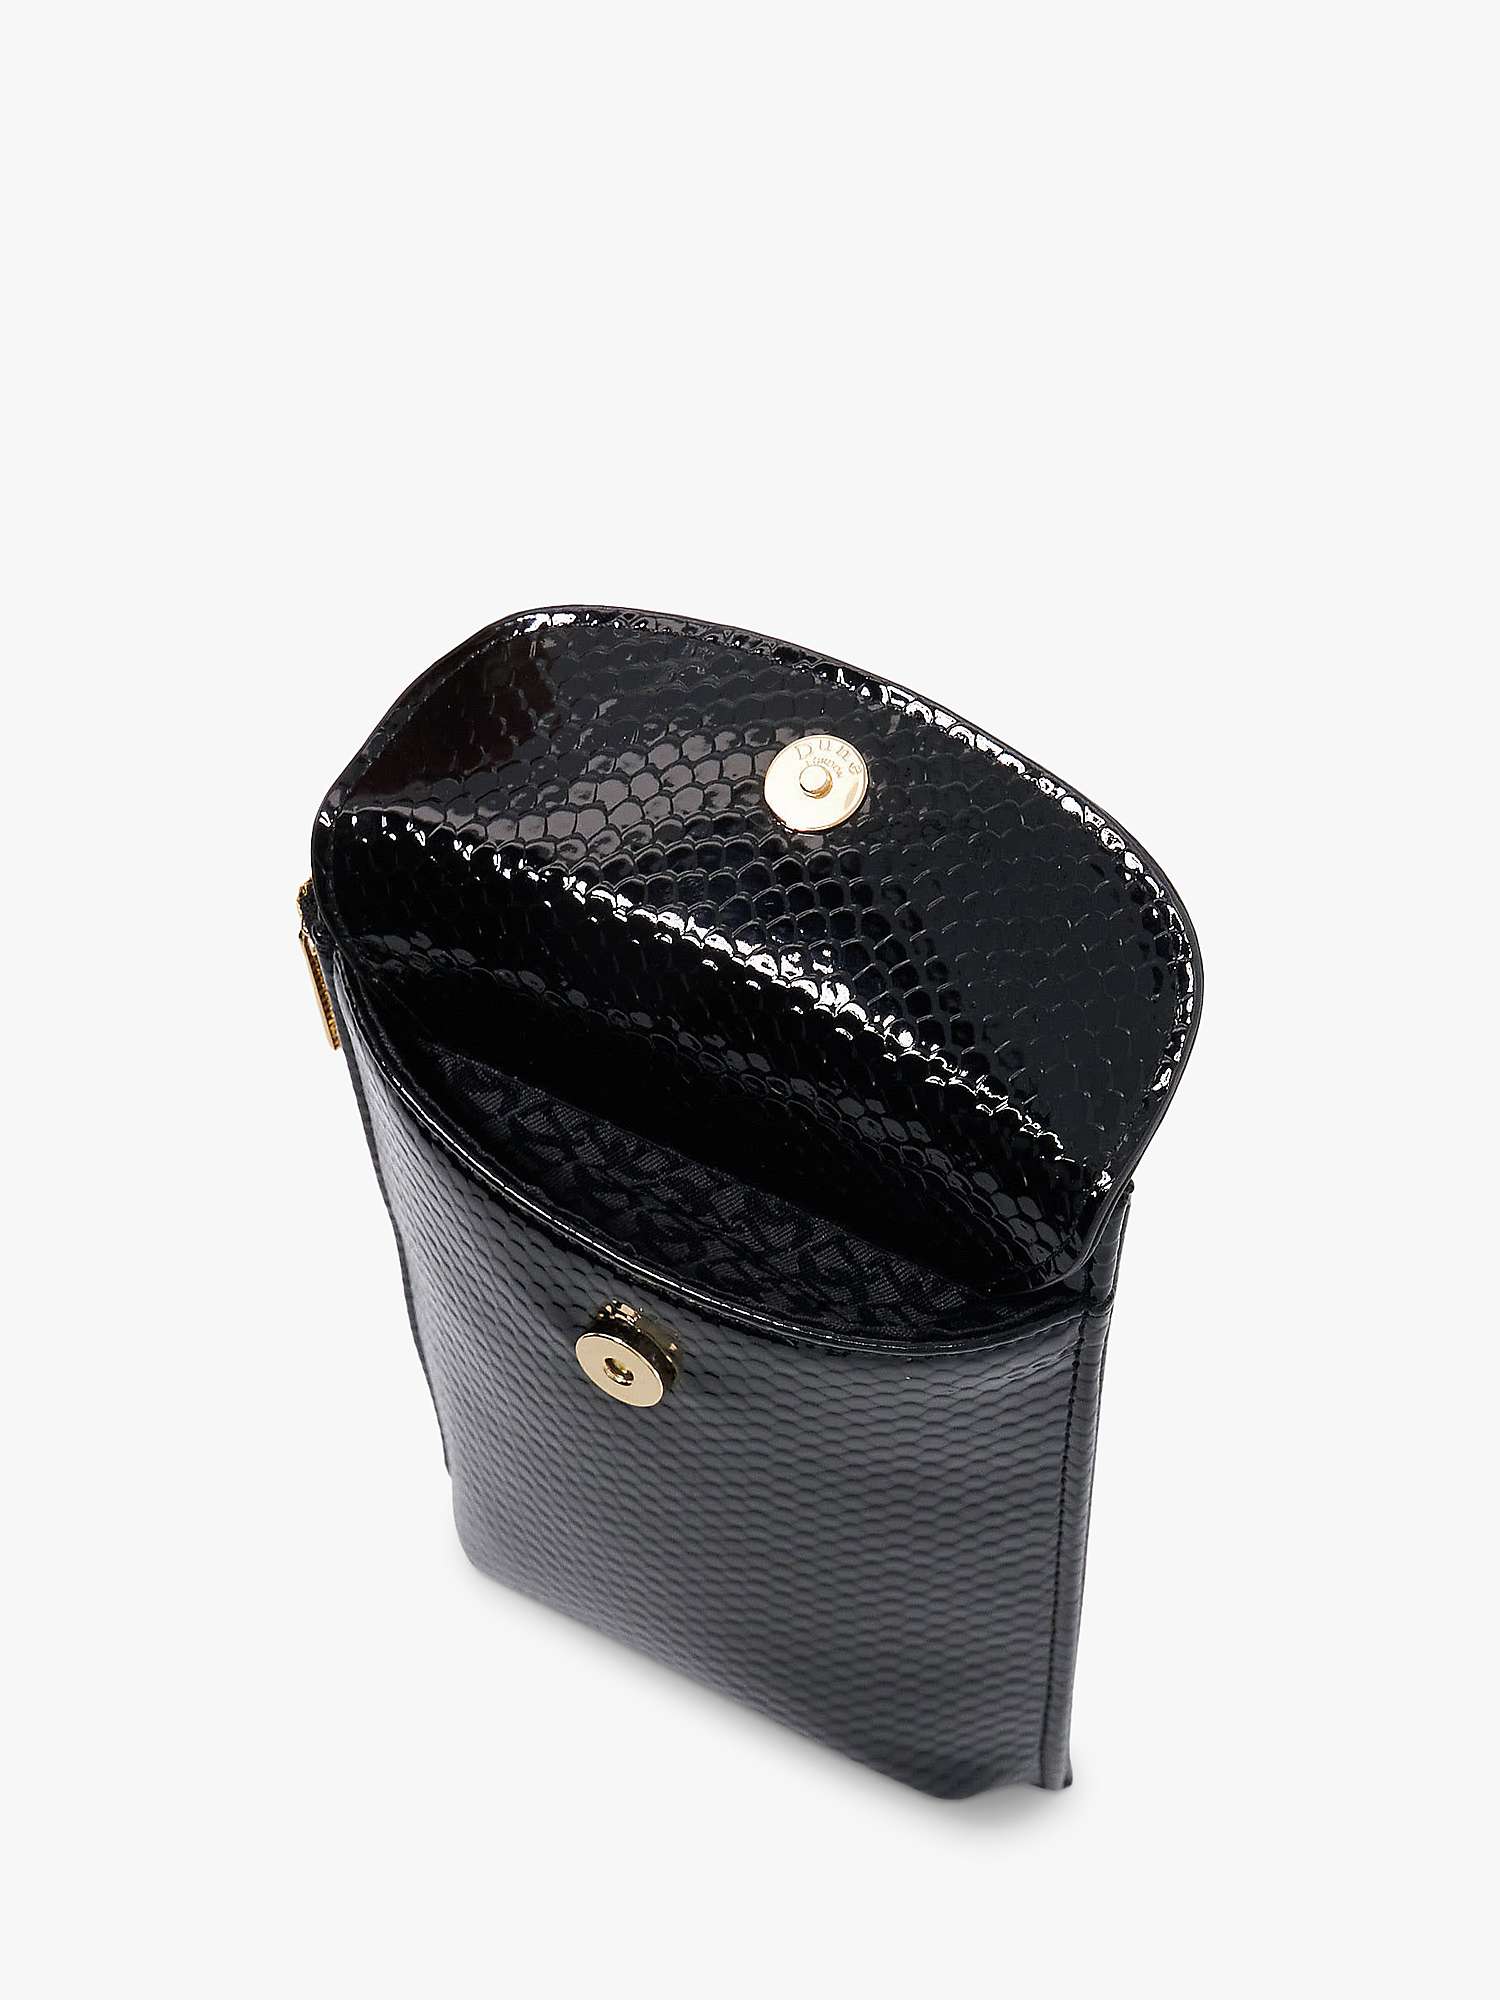 Buy Dune Shellies Multi Purpose Phone Pouch Online at johnlewis.com